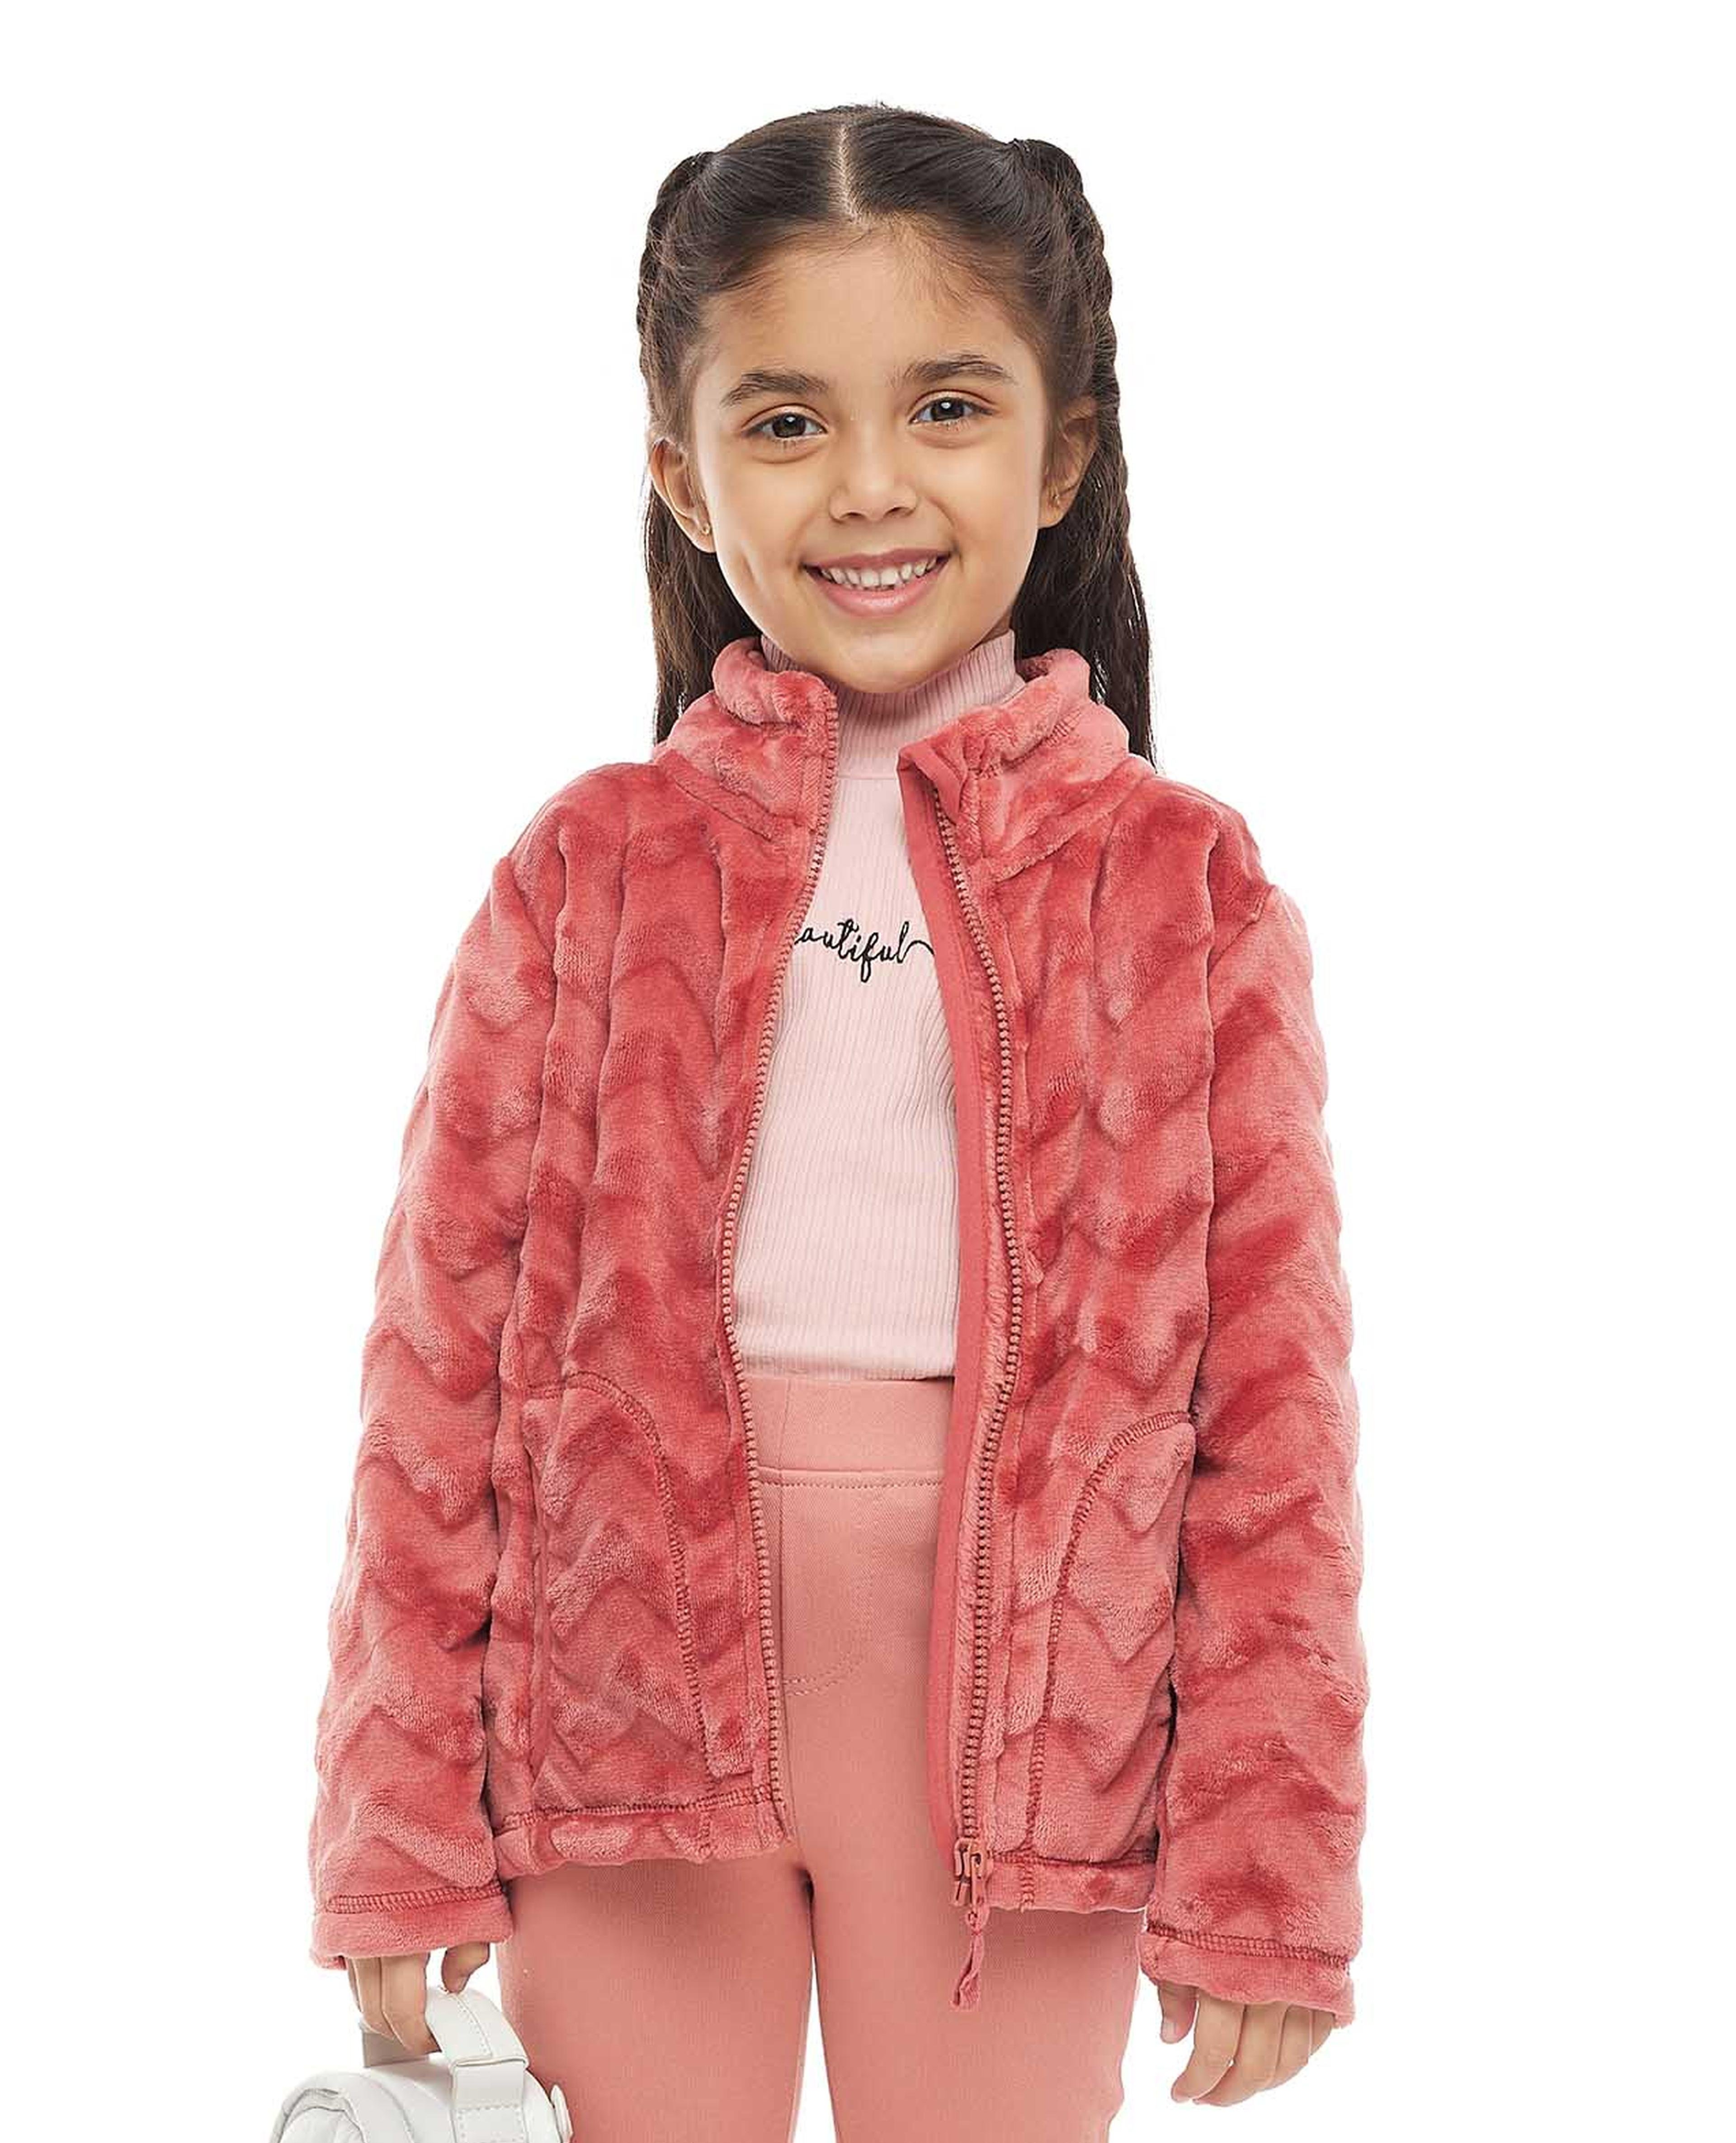 Plush Jacket with Zipper Front